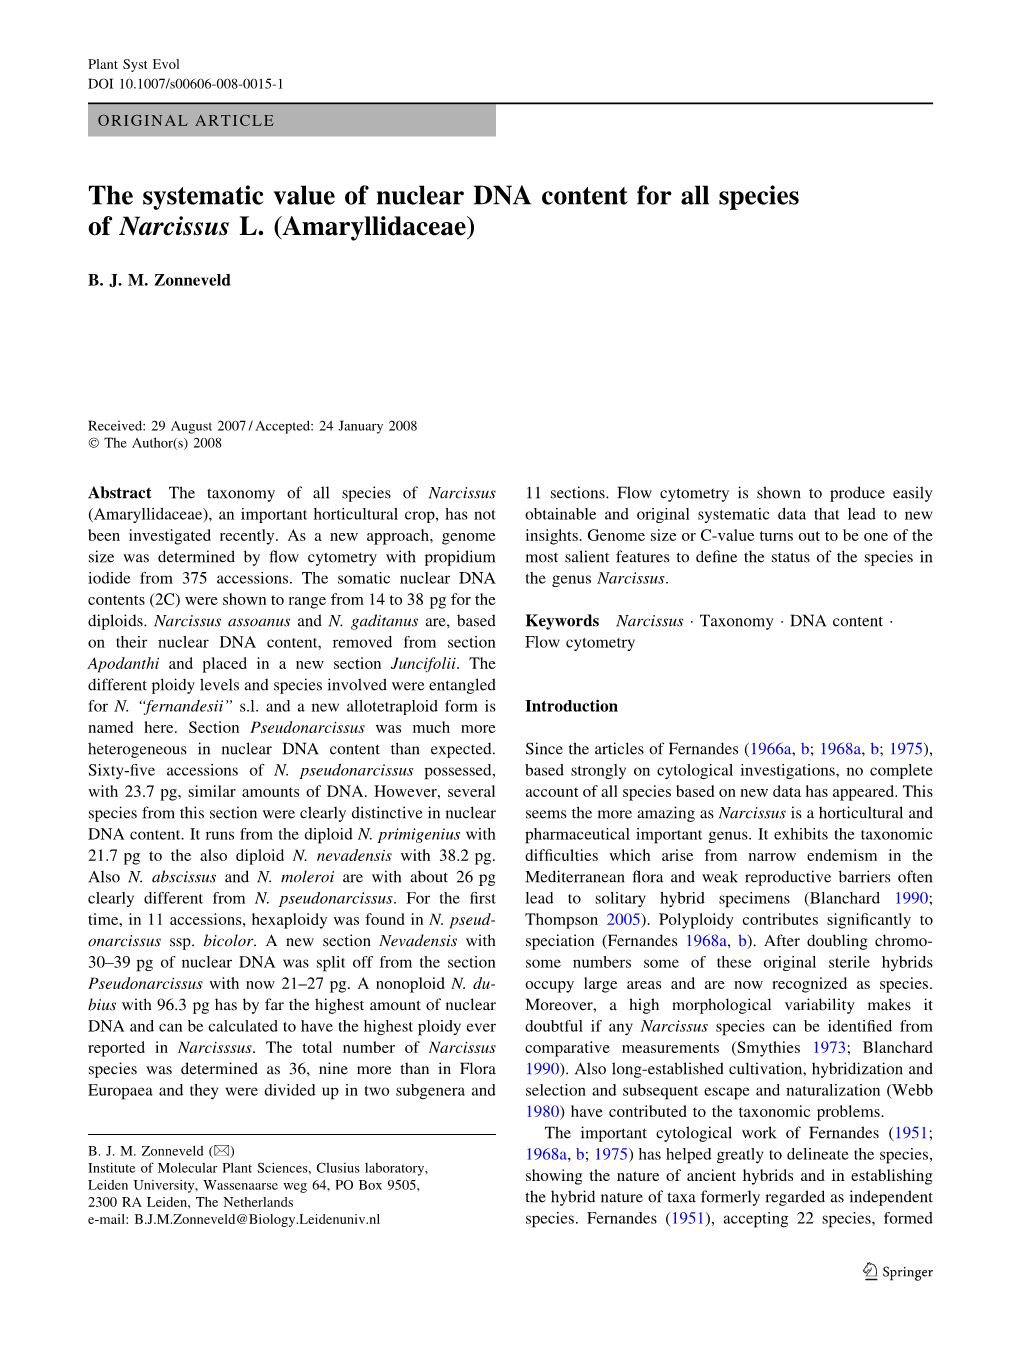 The Systematic Value of Nuclear DNA Content for All Species of Narcissus L. (Amaryllidaceae)